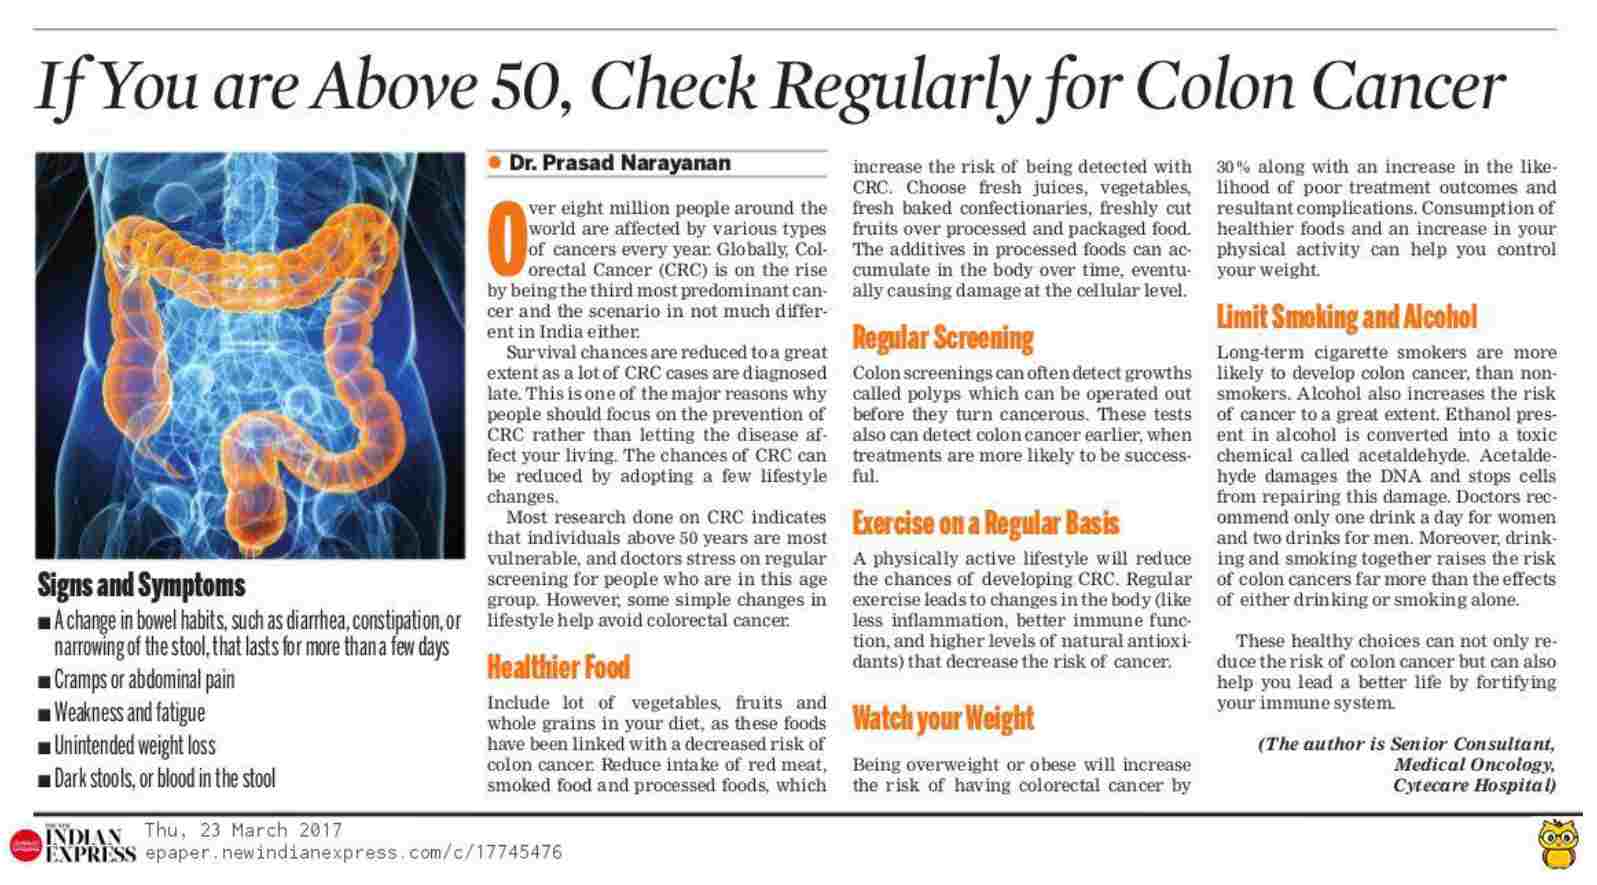 If you are above 50, check regularly for colon cancer